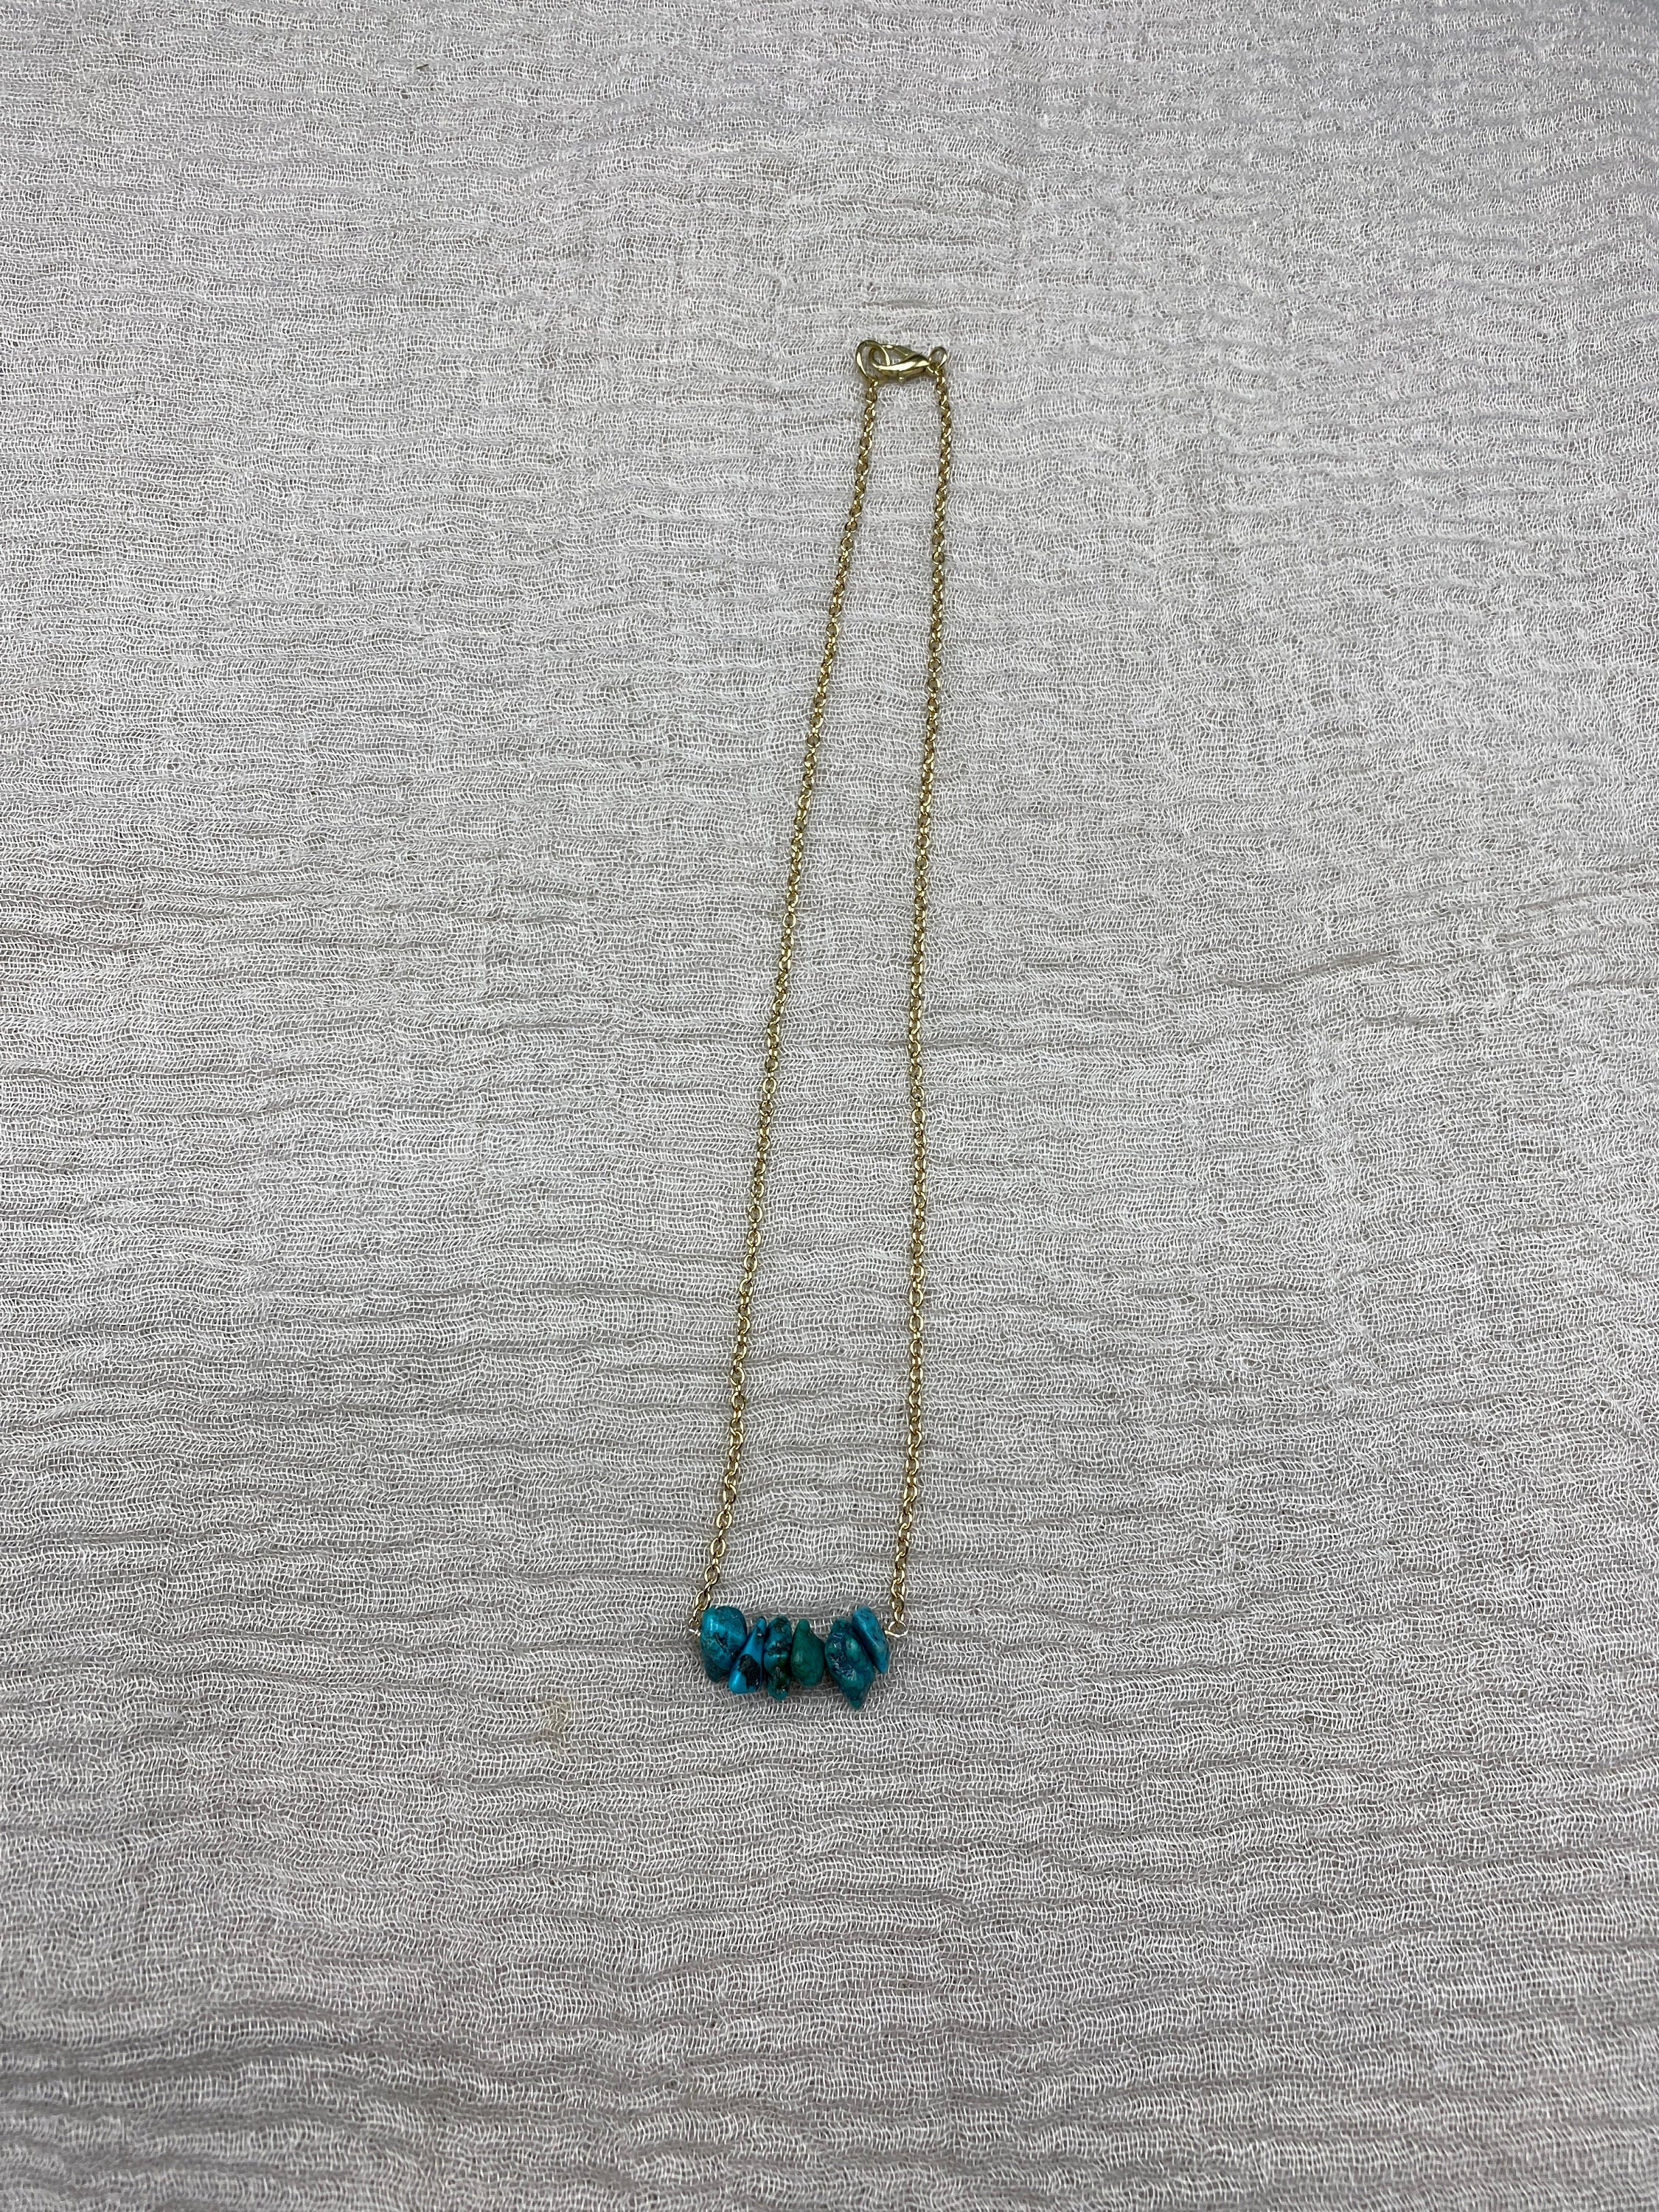 Turquoise Chip Necklace | Petite Dainty Gold Chain | Cute Chakra Energy - Mama’s Malas jewelry